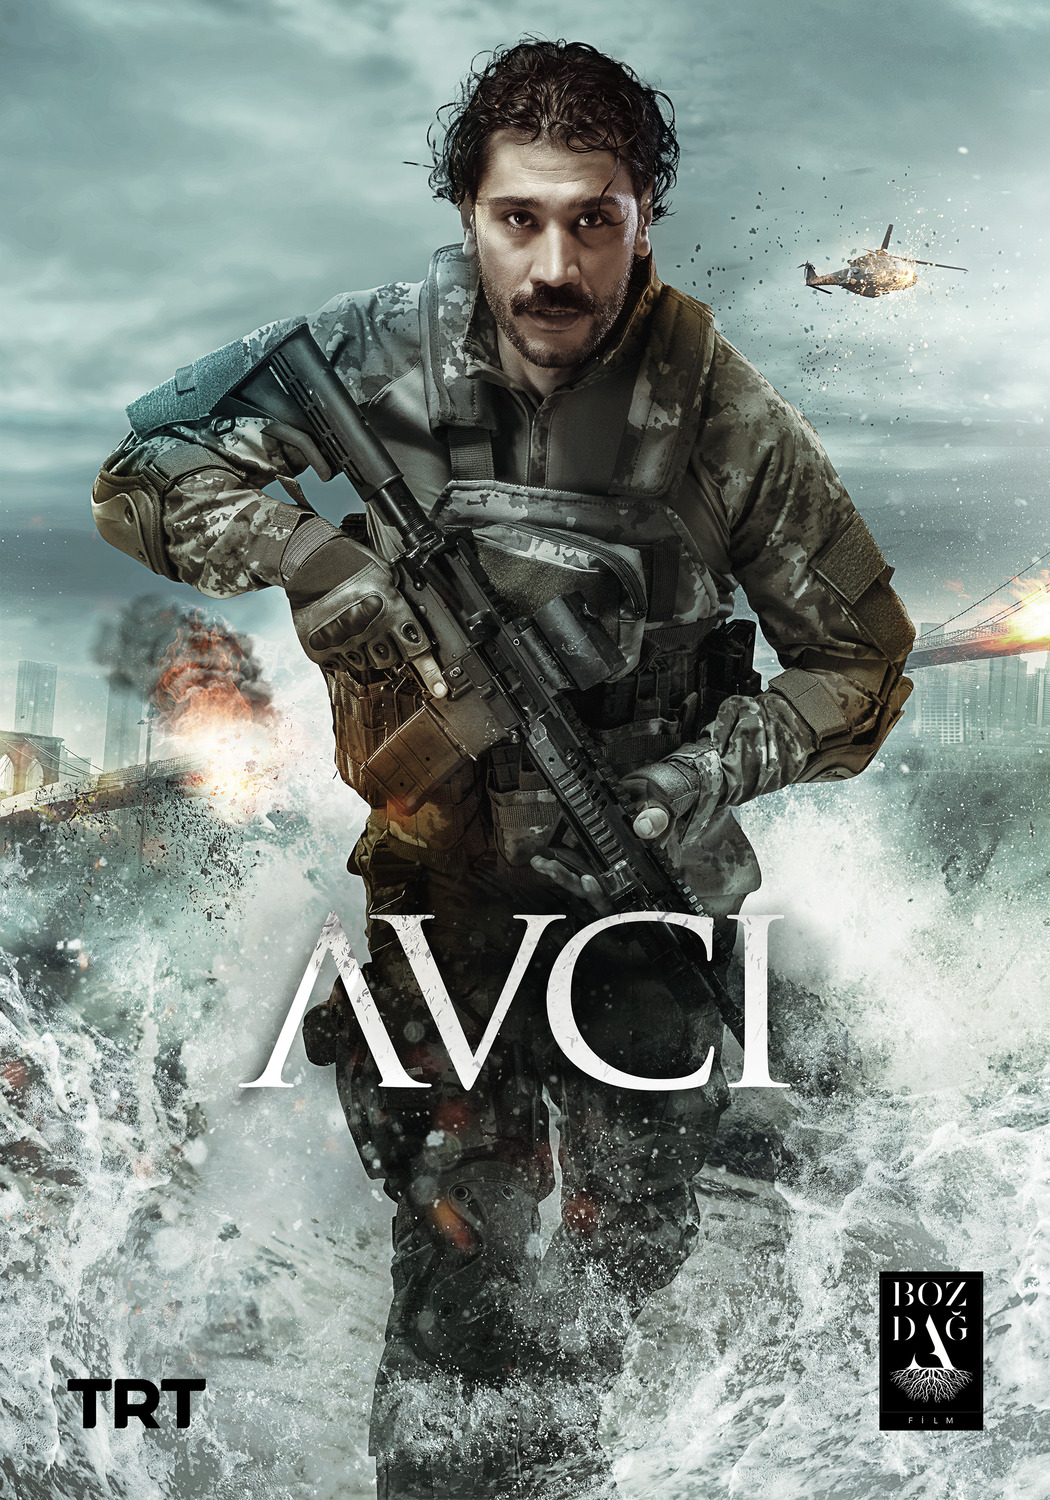 Extra Large TV Poster Image for Avci (#3 of 5)